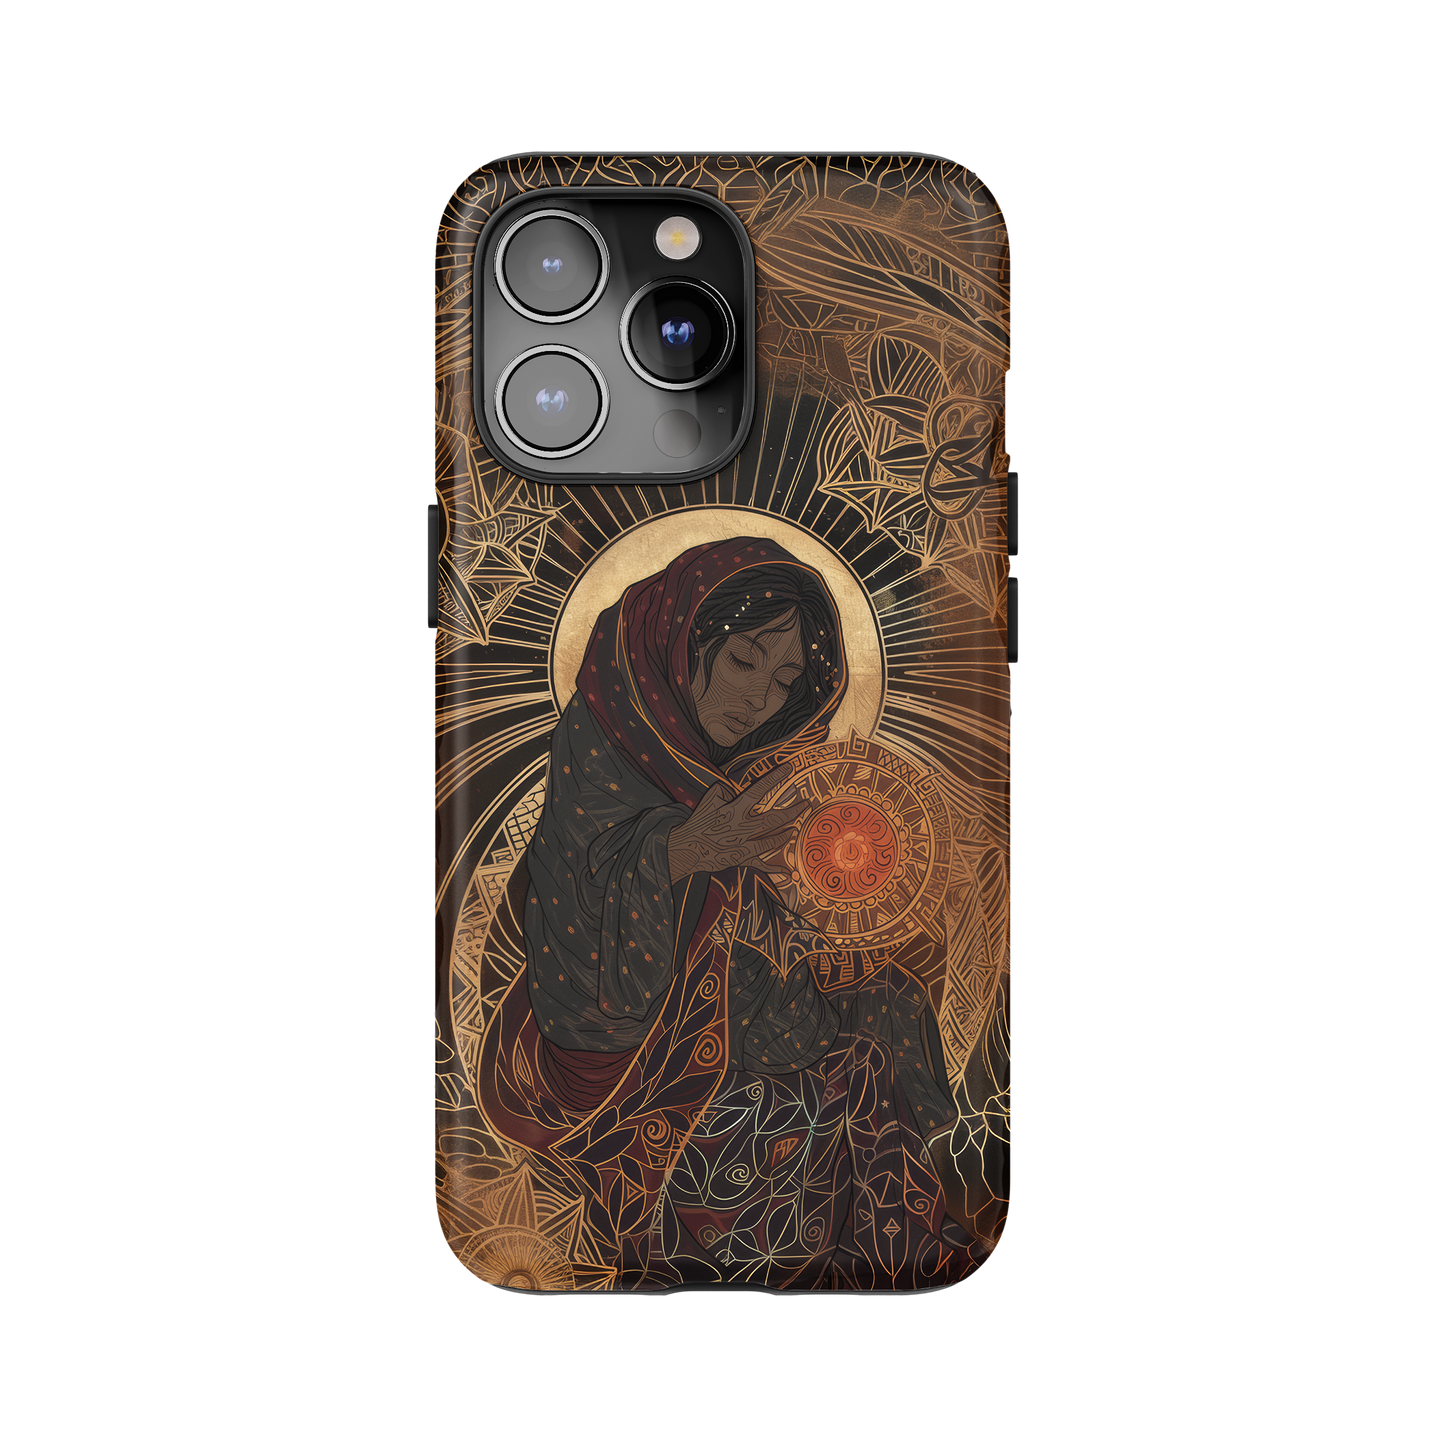 Celestial Spiritual Phone Case for iPhone and Samsung